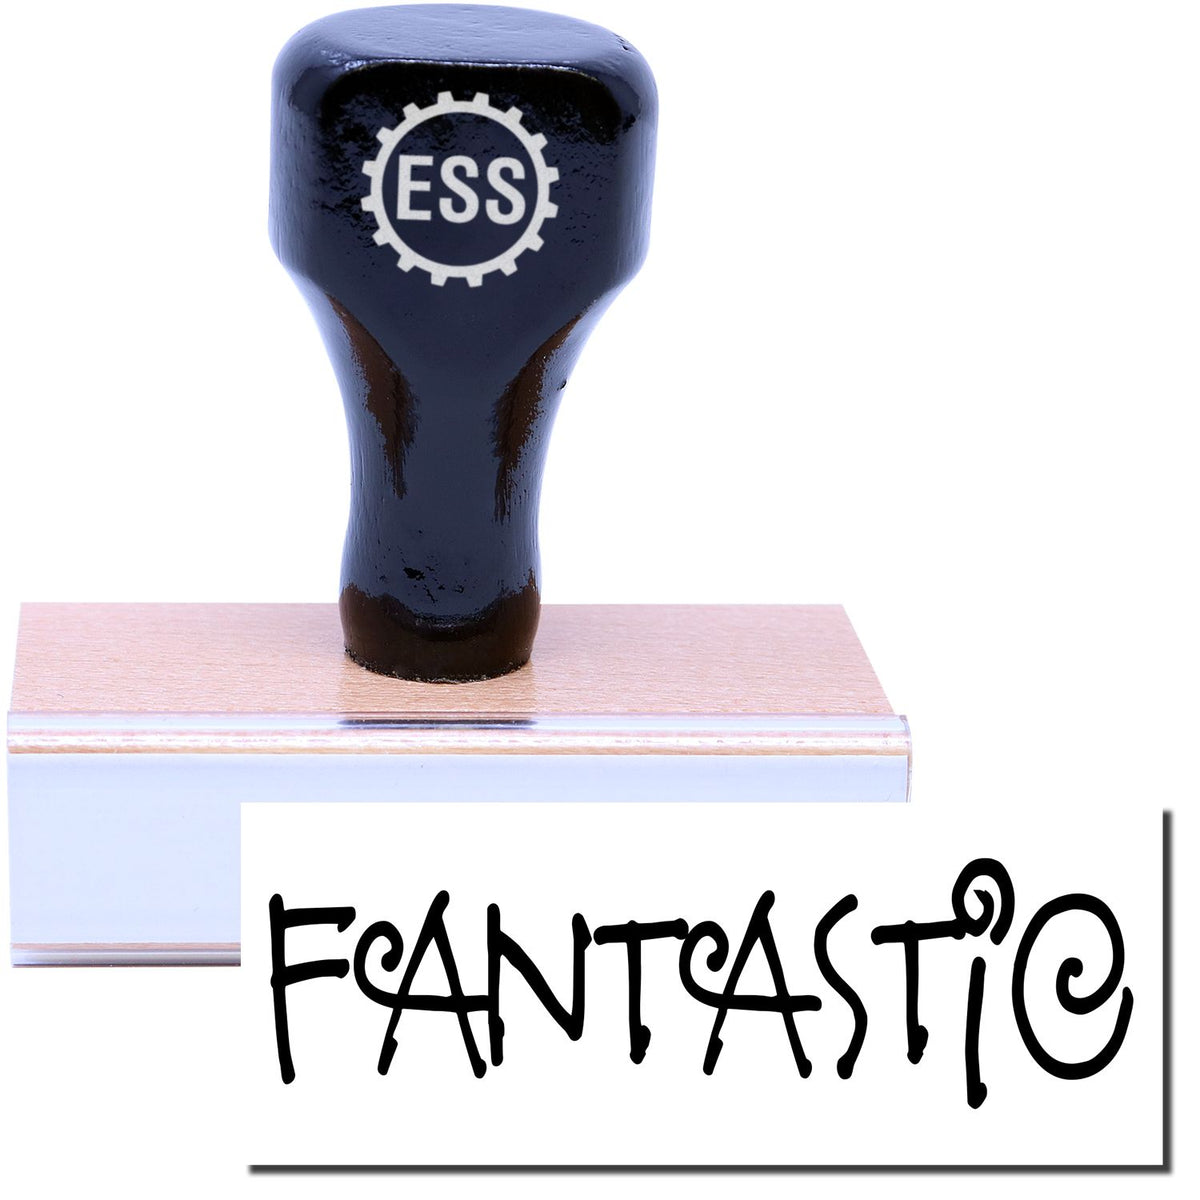 A stock office rubber stamp with a stamped image showing how the text &quot;FANTASTIC&quot; in a large font is displayed after stamping.